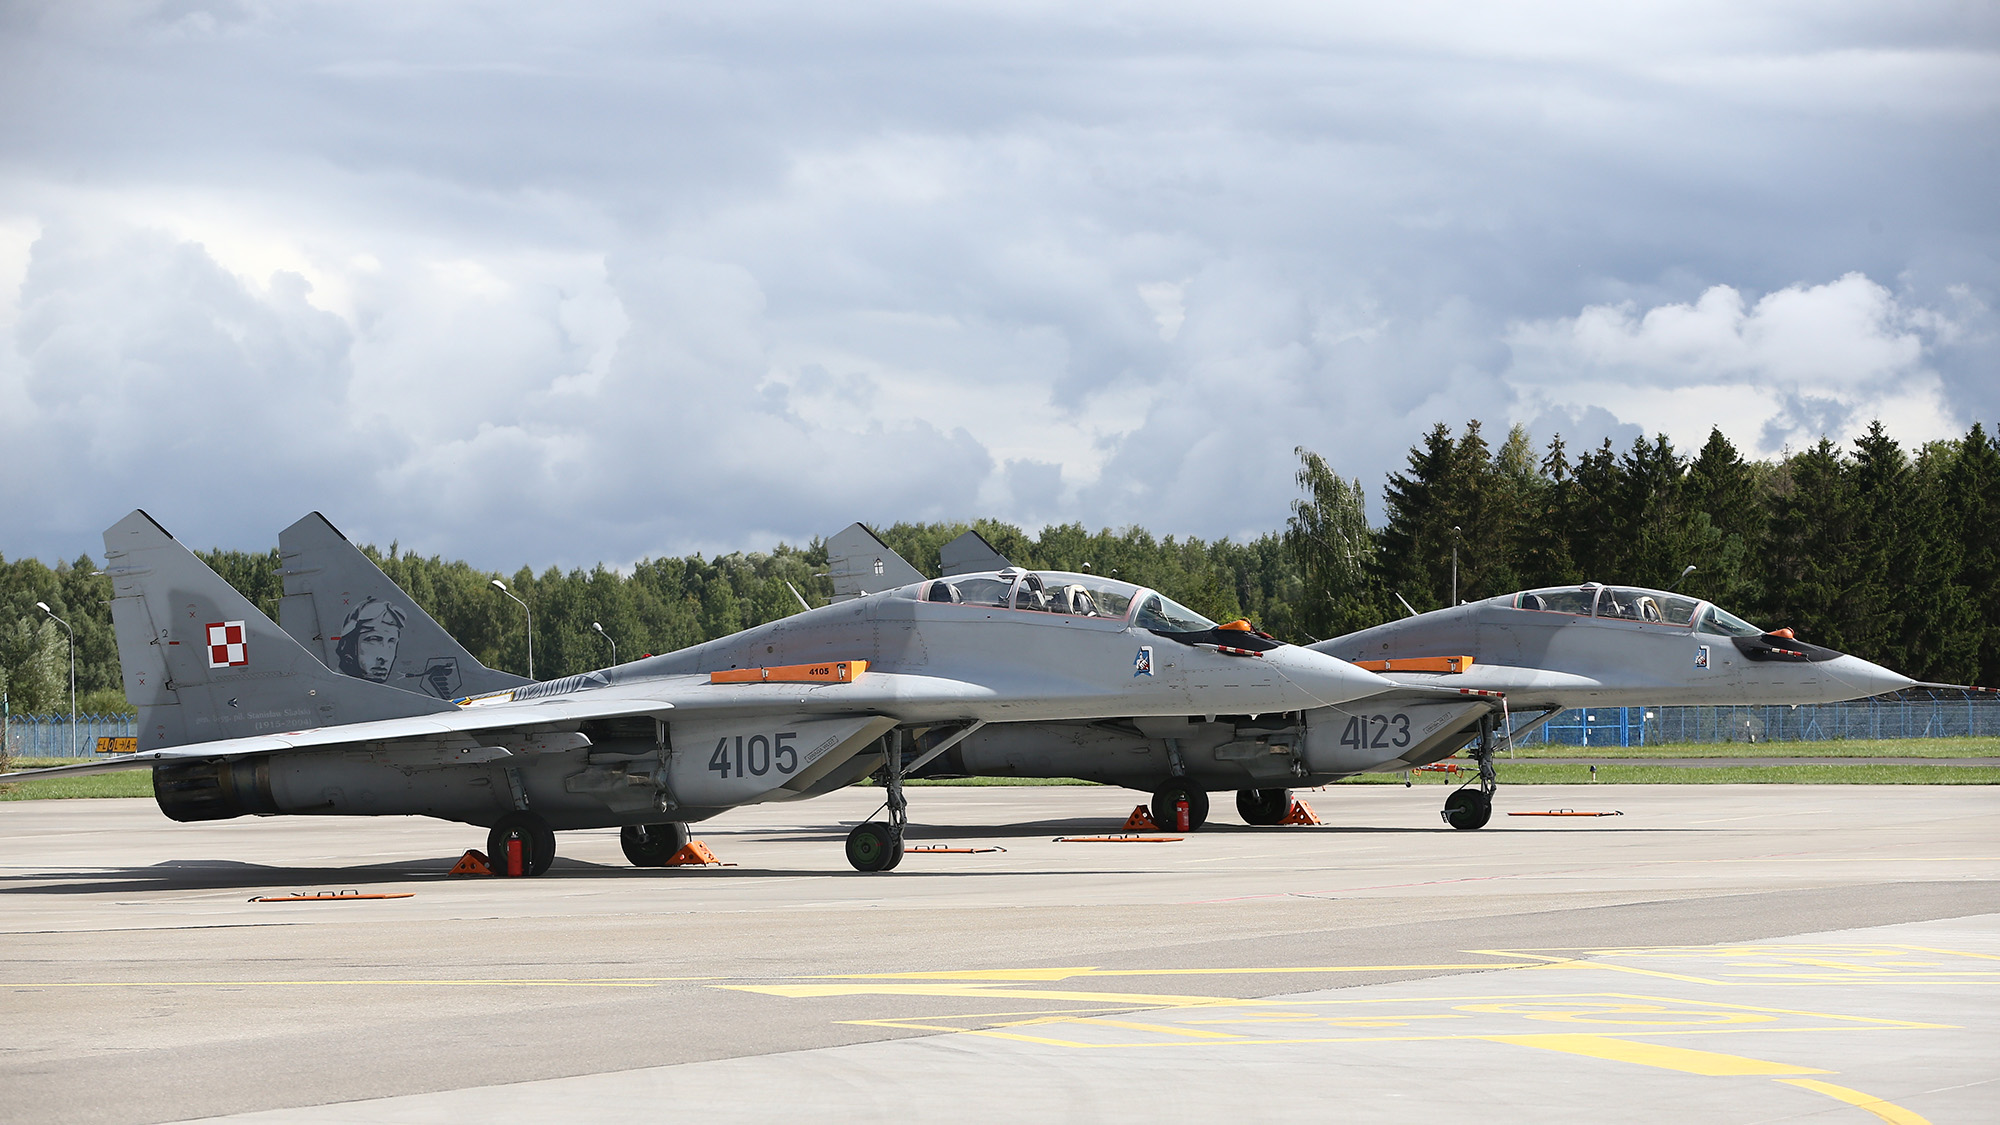 Two Polish Air Force MIG-29's are seen at the 22nd Air Base Command in Malbork, Poland on August 27, 2021. 